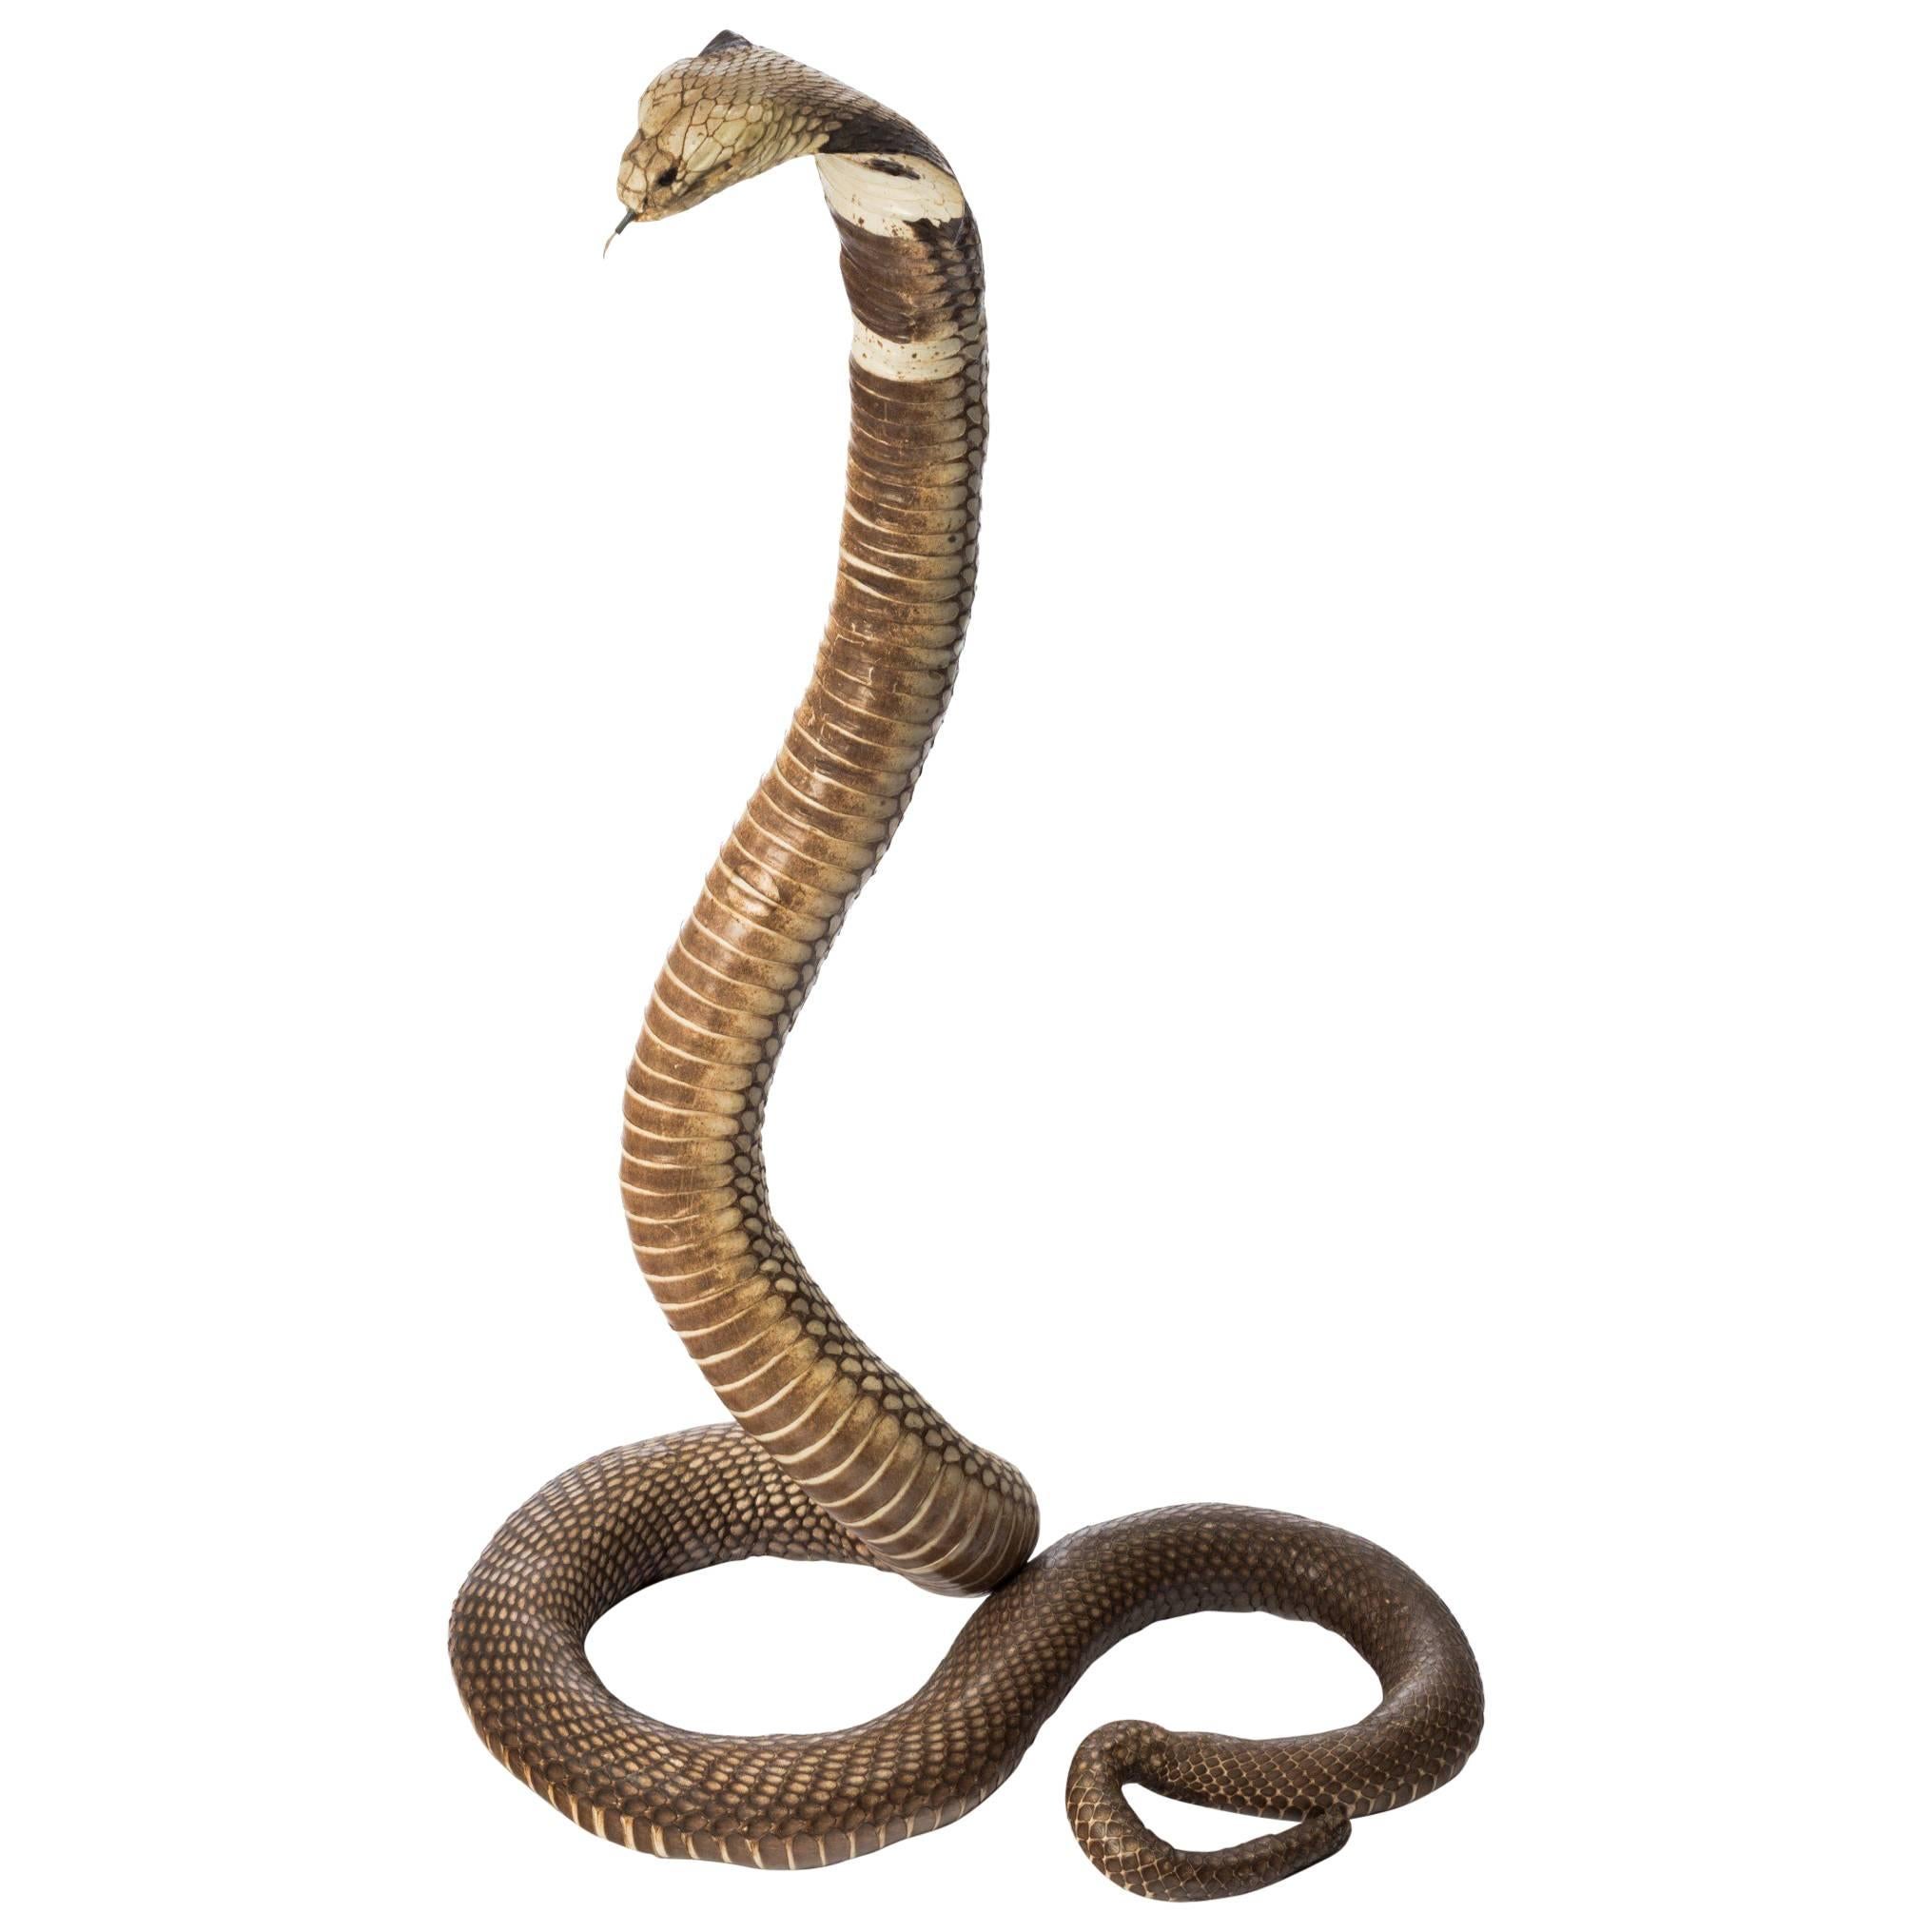 Antique Taxidermy Monocled Cobra